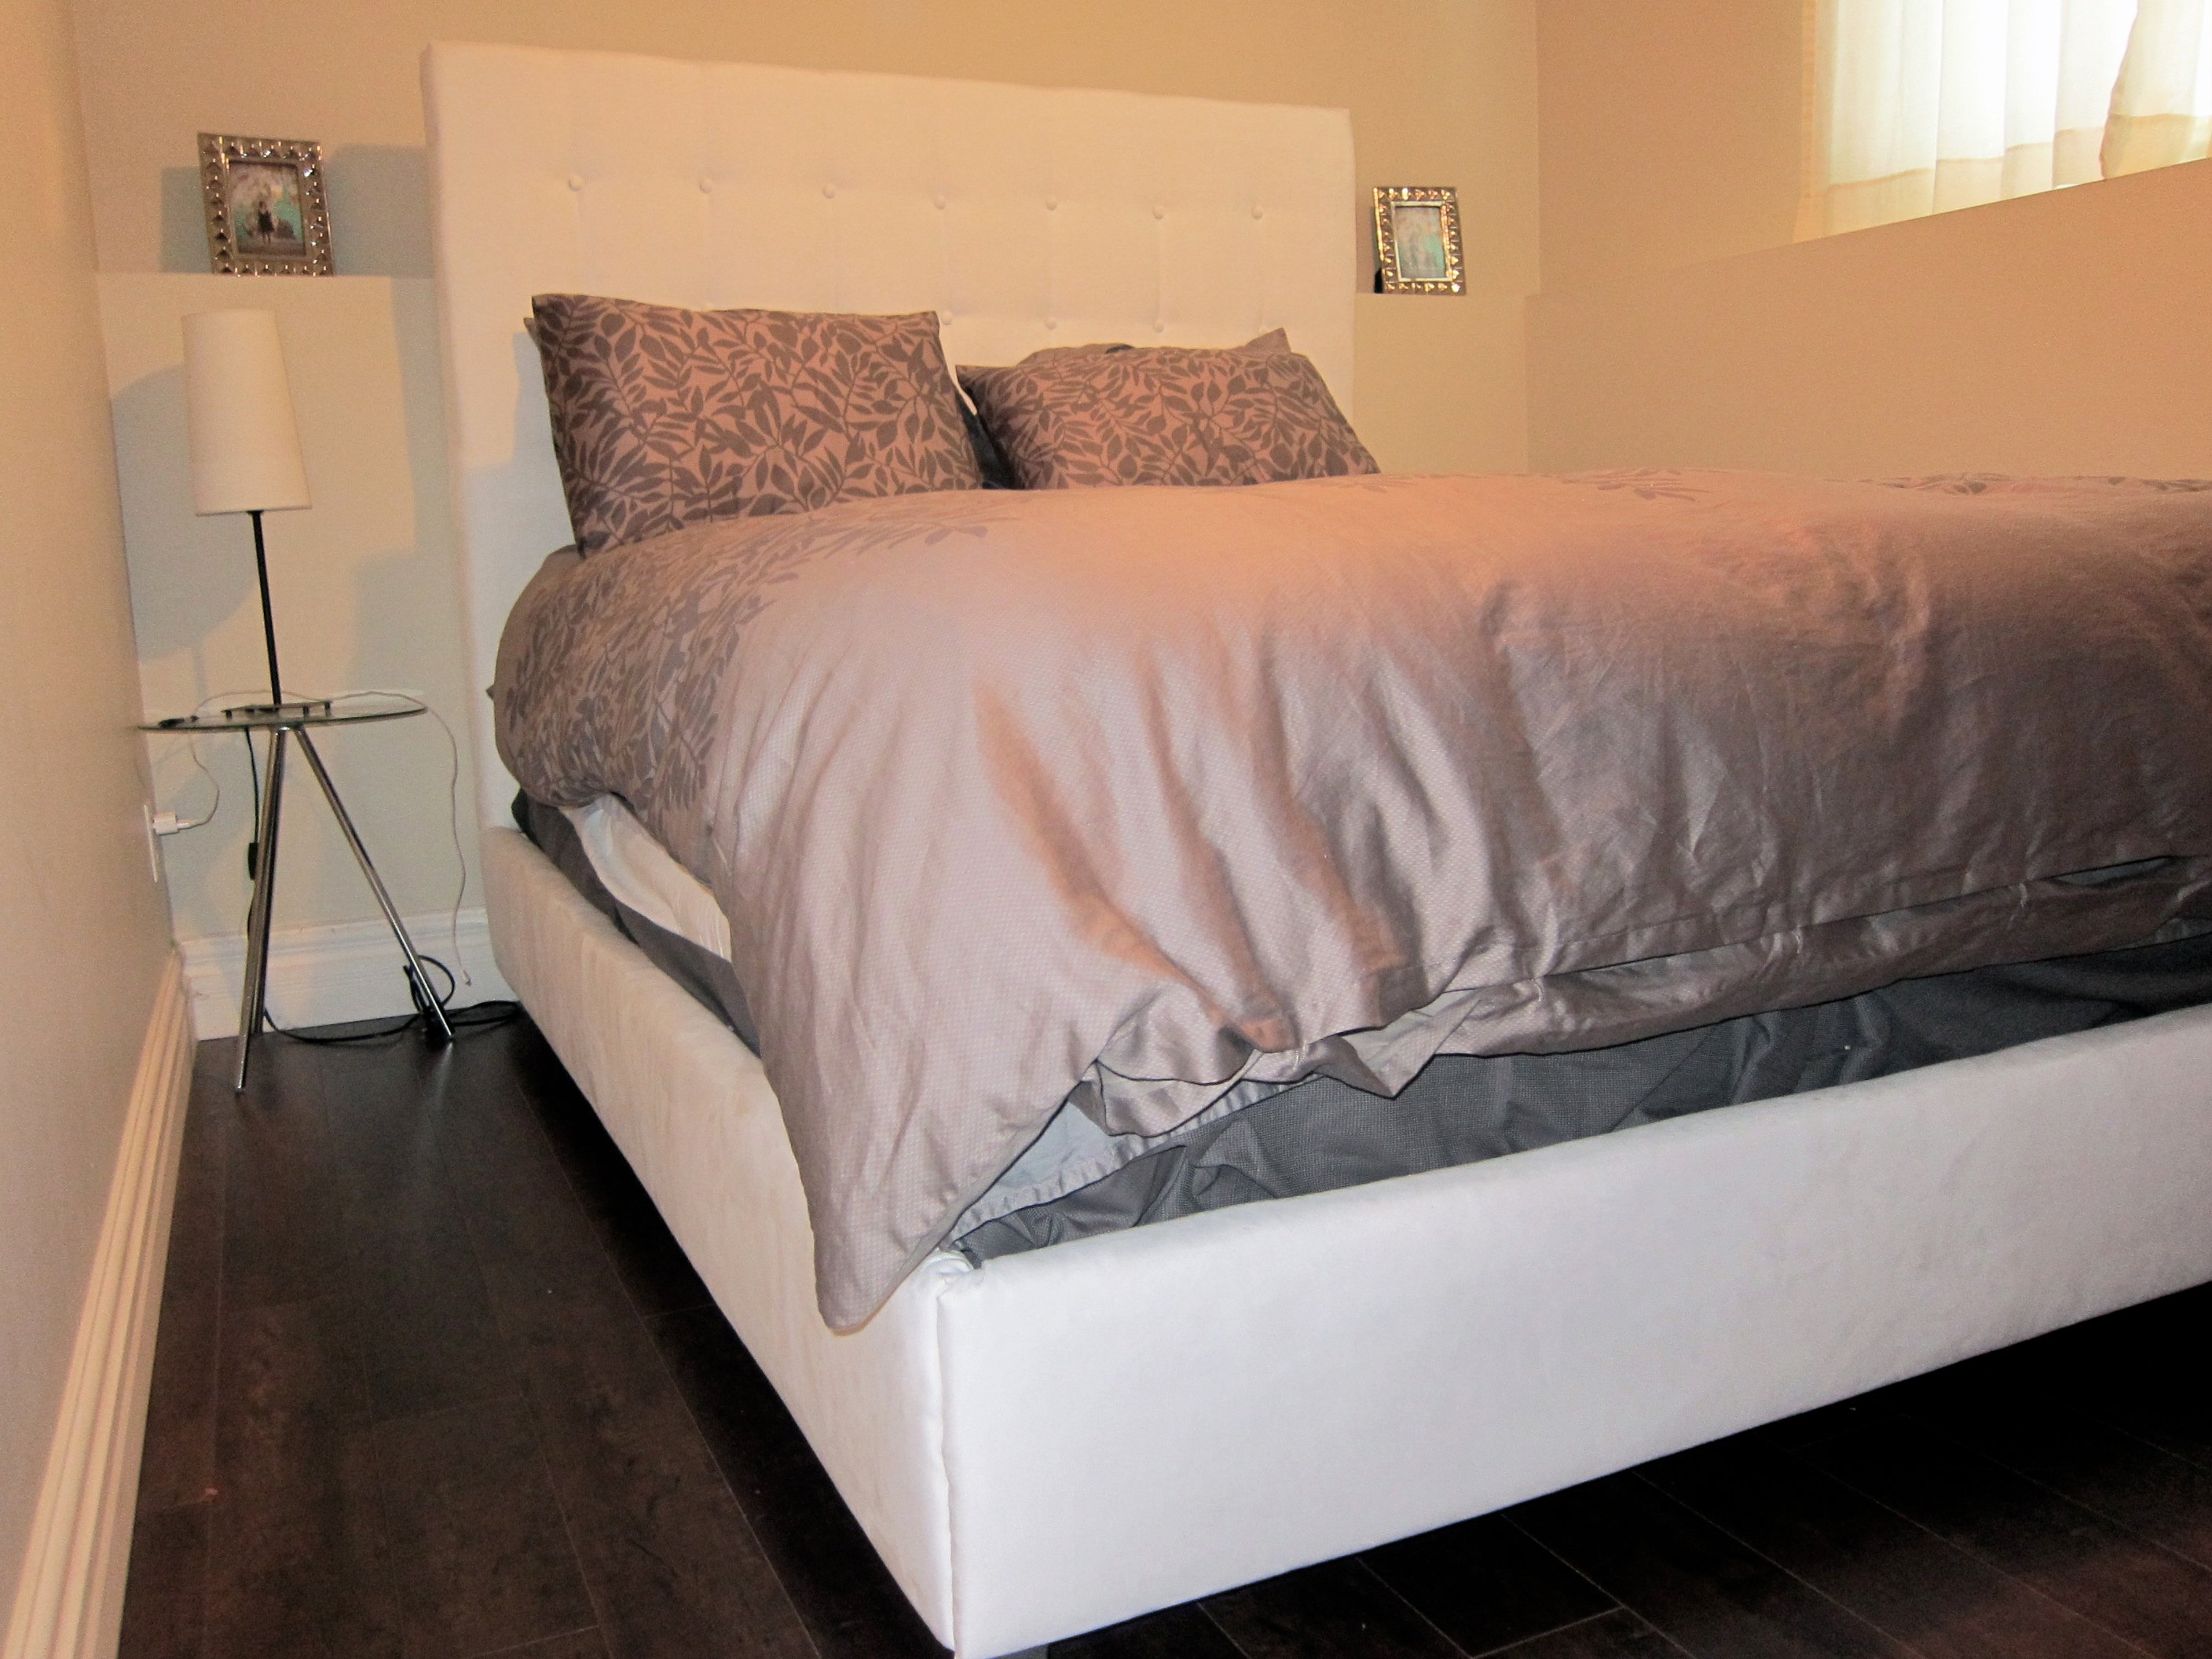 Diy Upholstered Bed Ana White, How To Build A King Size Upholstered Headboard